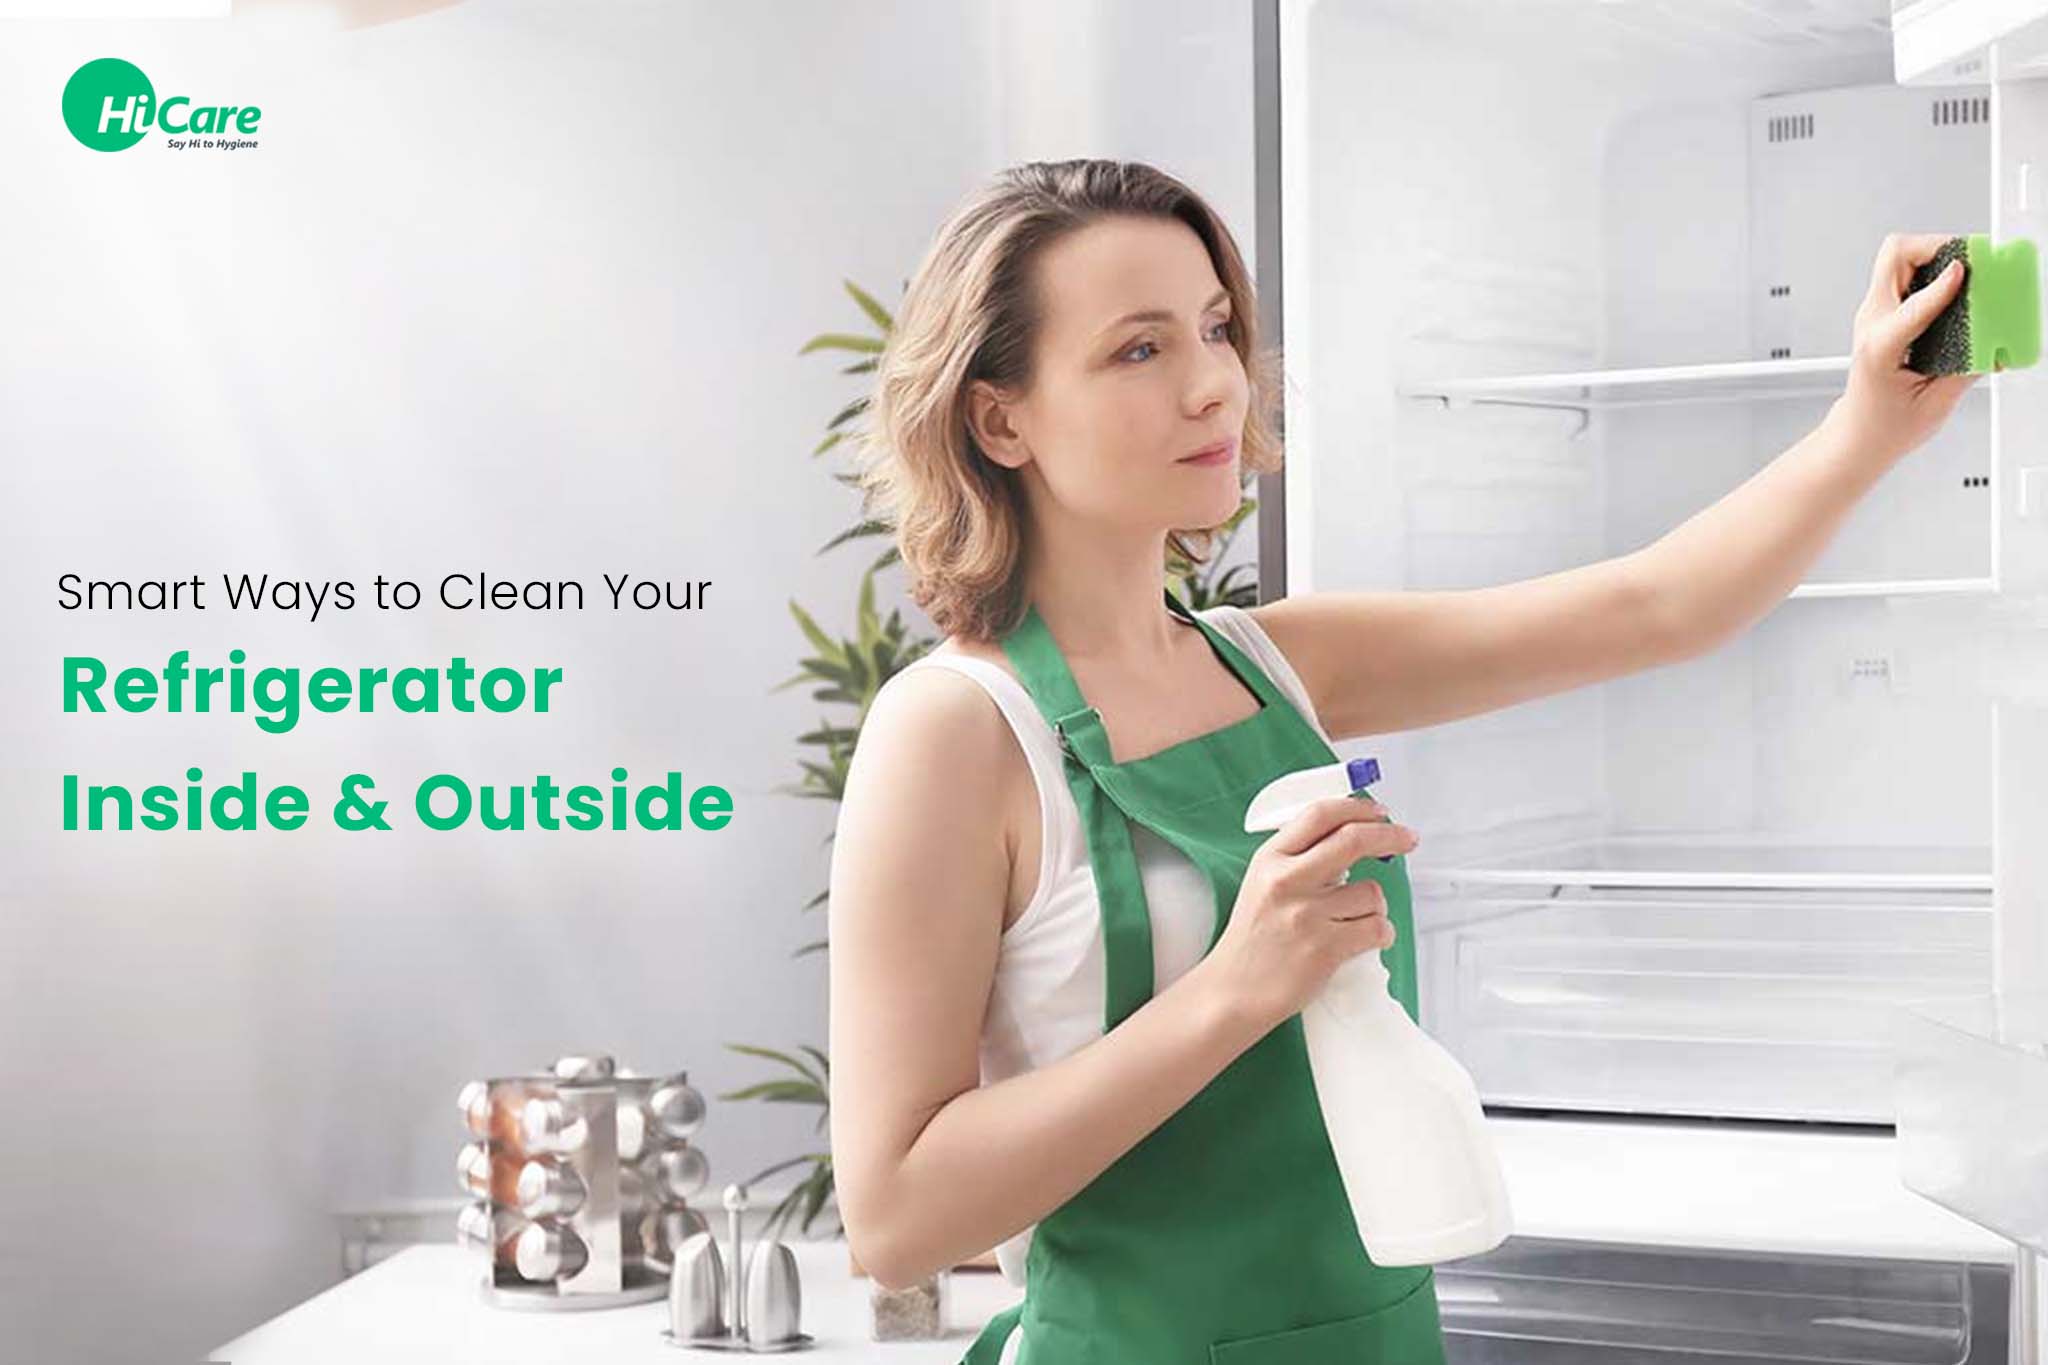 https://hicare.in/blog/wp-content/uploads/2022/11/smart-Ways-to-Clean-Your-Refrigerator-Insiade-and-Outside.jpg